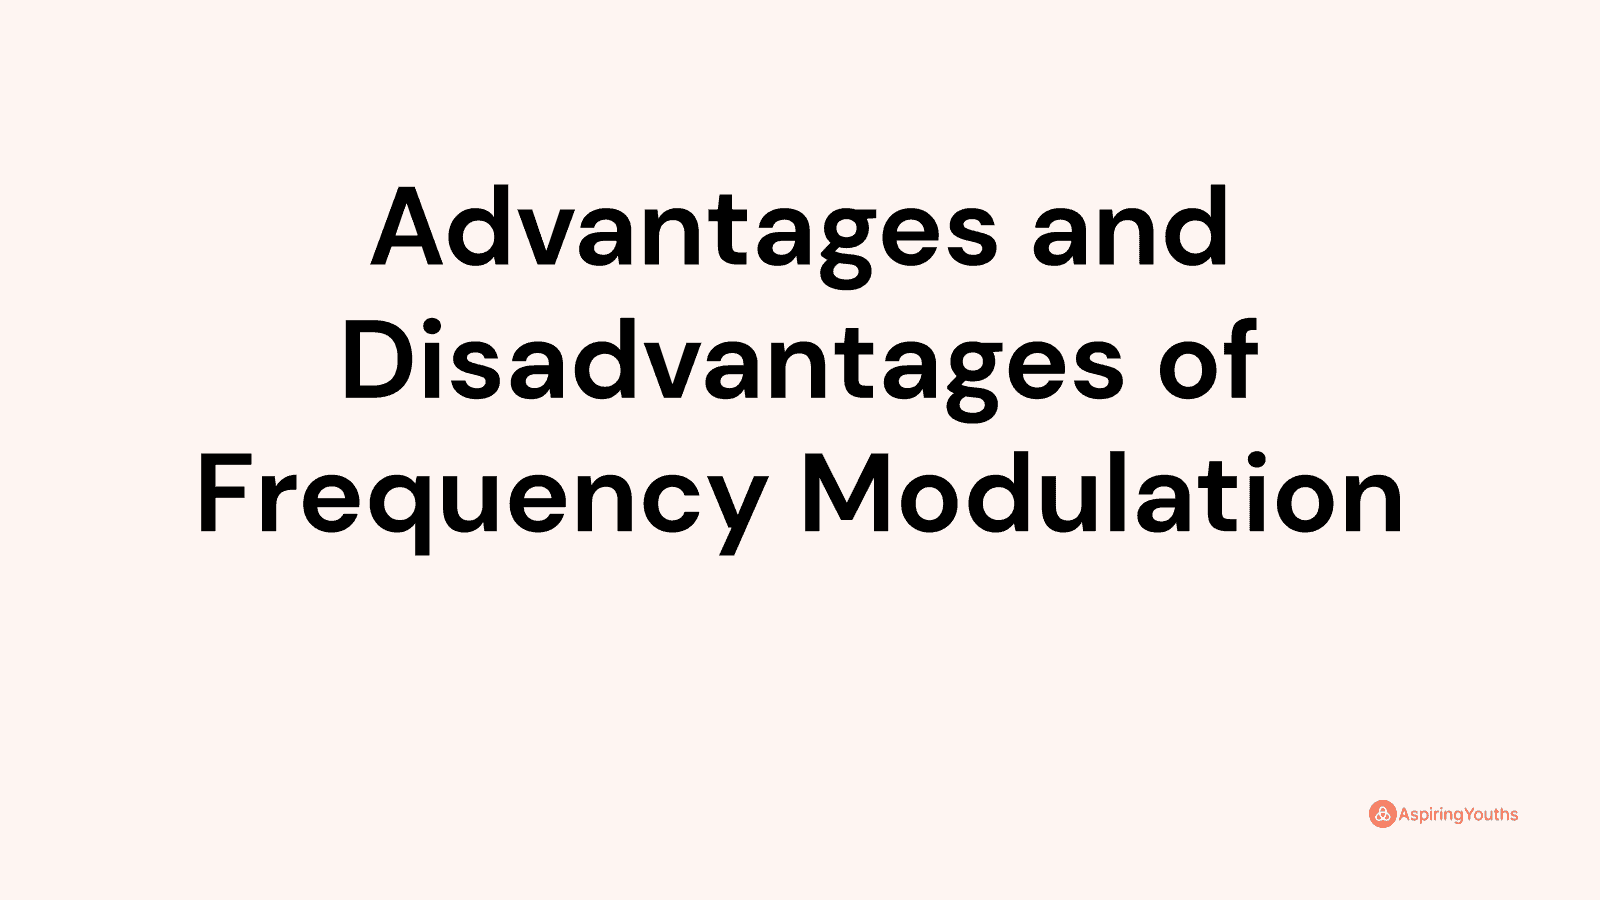 Advantages and disadvantages of Frequency Modulation